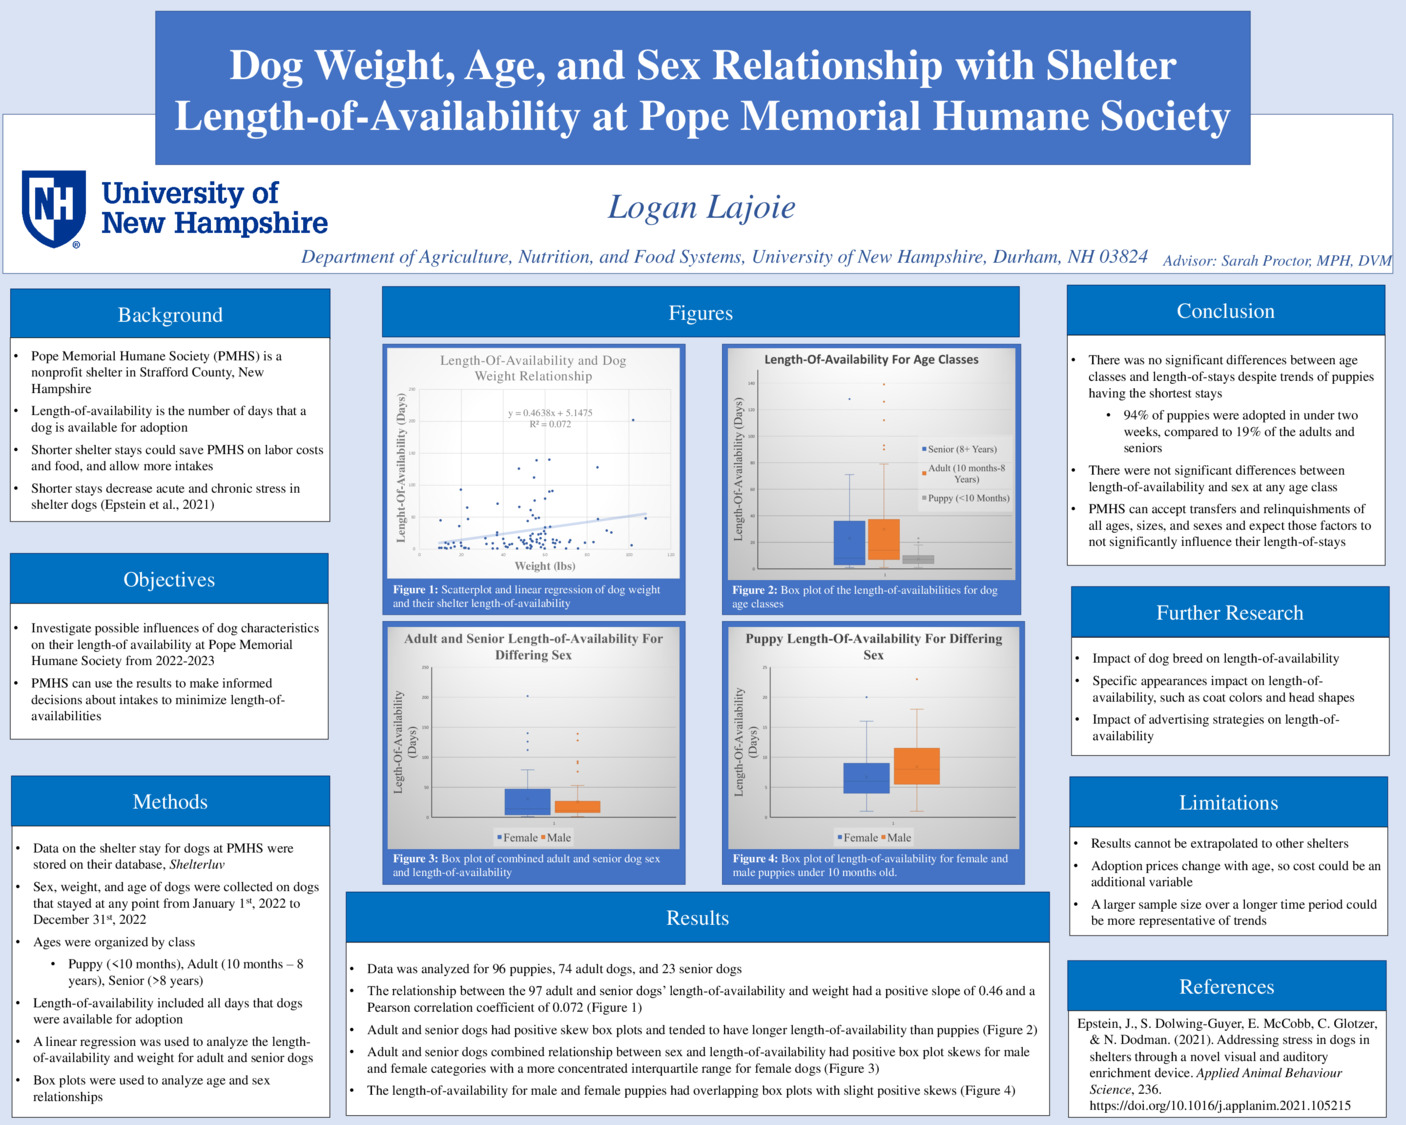 Dog Weight, Age, And Sex Relationship With Shelter Length-Of-Availability At Pope Memorial Humane Society by lsl1008